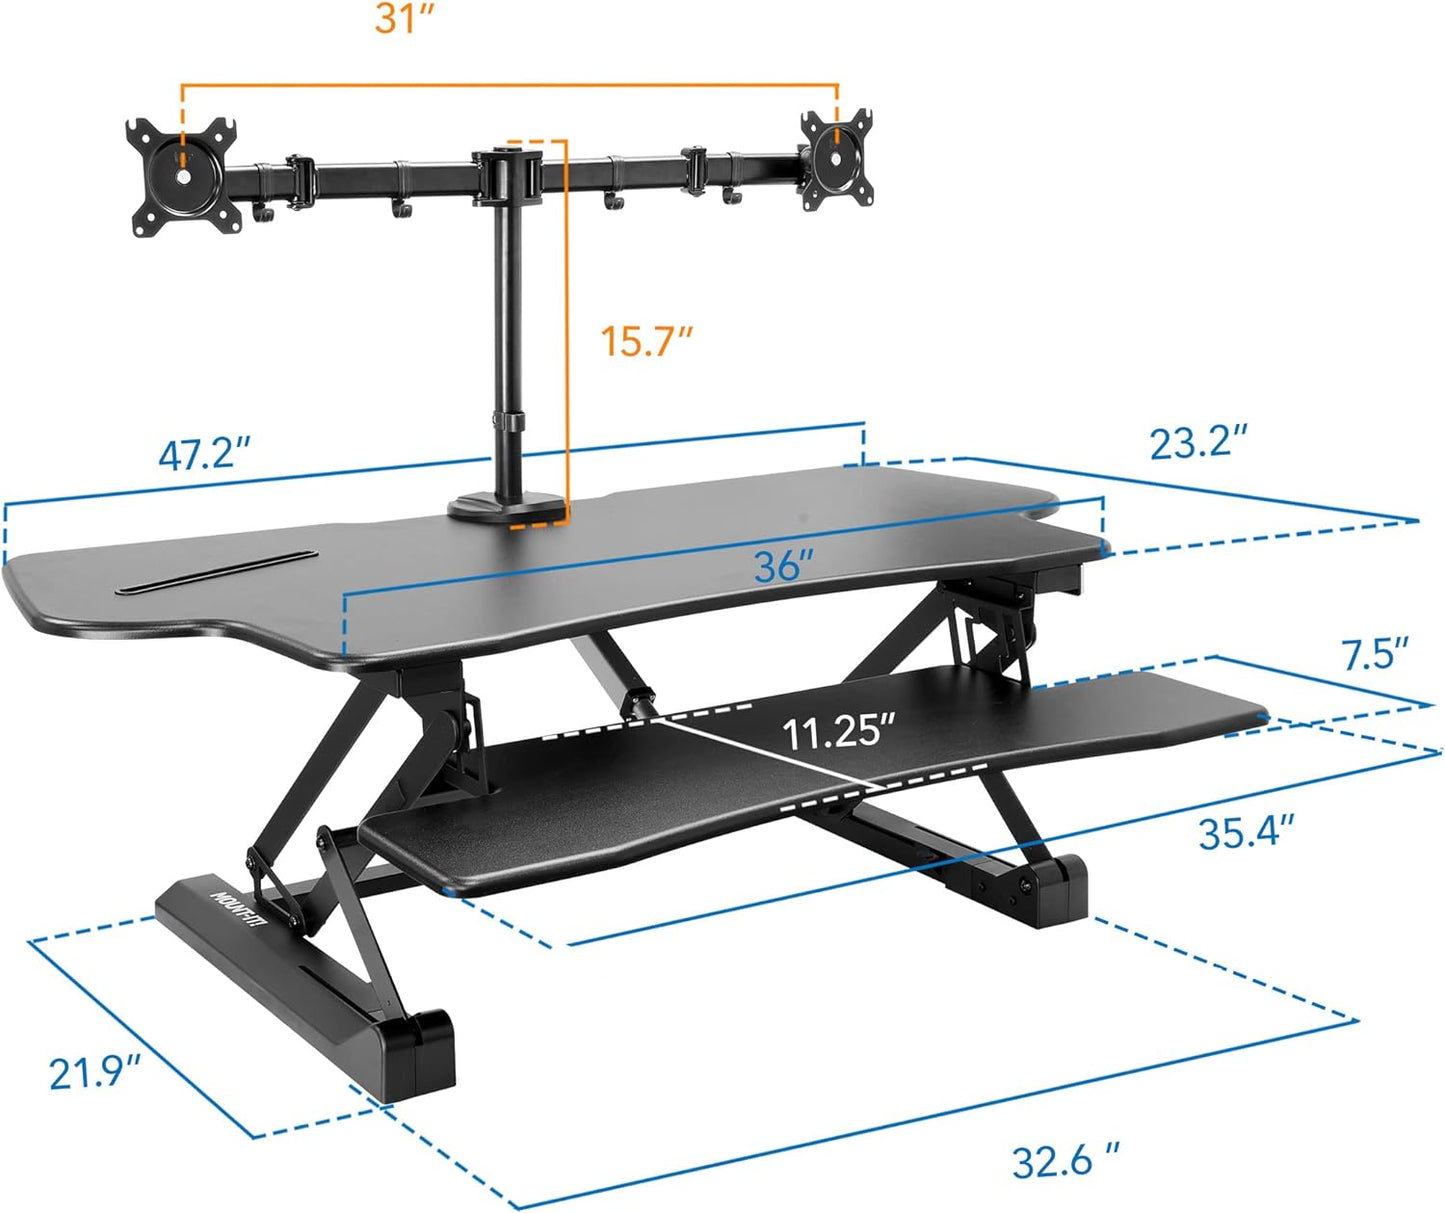 Electric Stand up Desk Converter with Dual Monitor Arm -  Motorized Standing Desk Riser with Monitor Mount for 2 Screens Max 32" - Large 47" Desktop Black Standing Desk with Keyboard Tray and USB